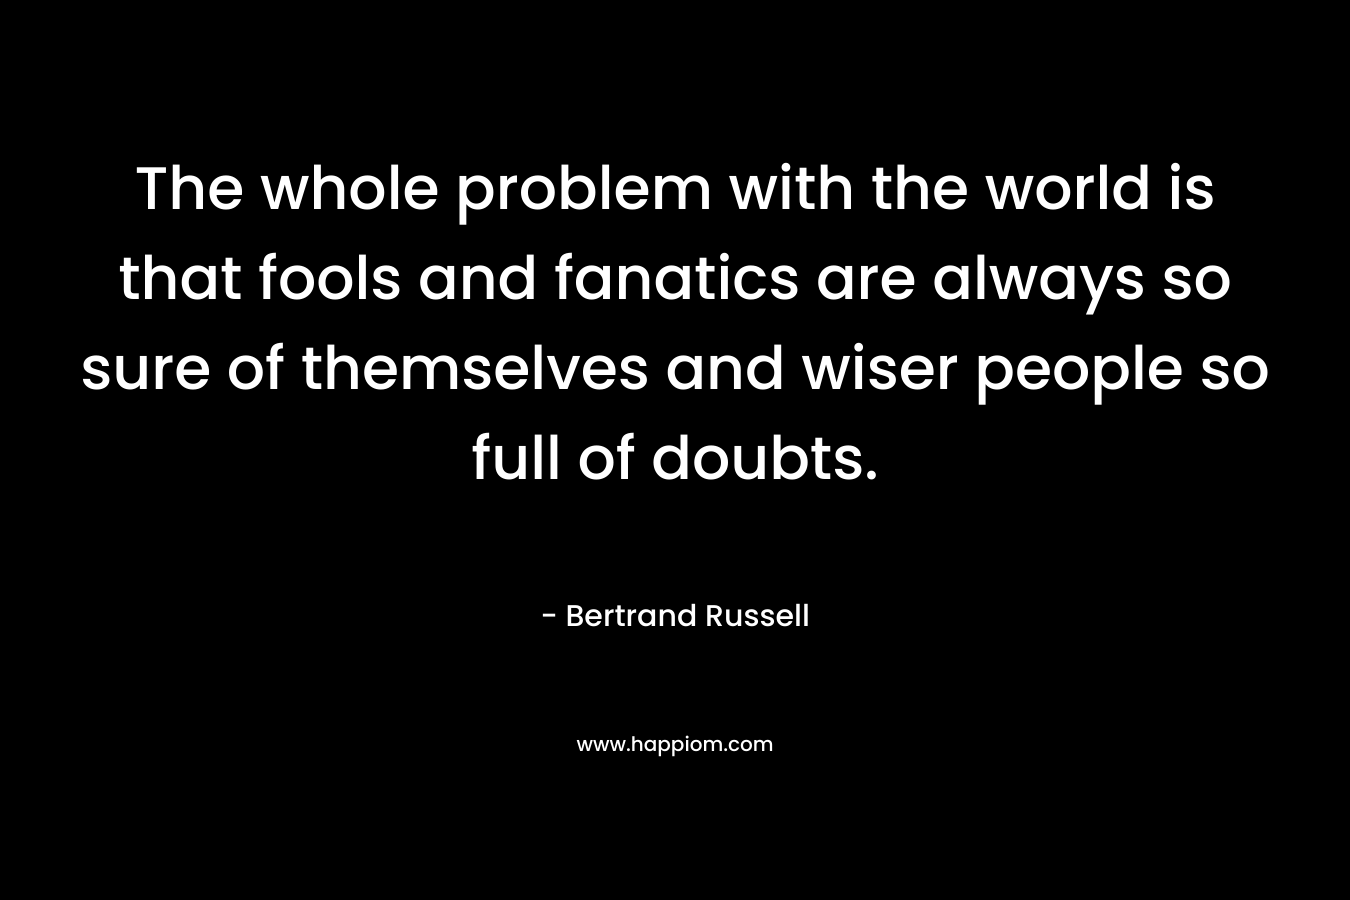 The whole problem with the world is that fools and fanatics are always so sure of themselves and wiser people so full of doubts. – Bertrand Russell